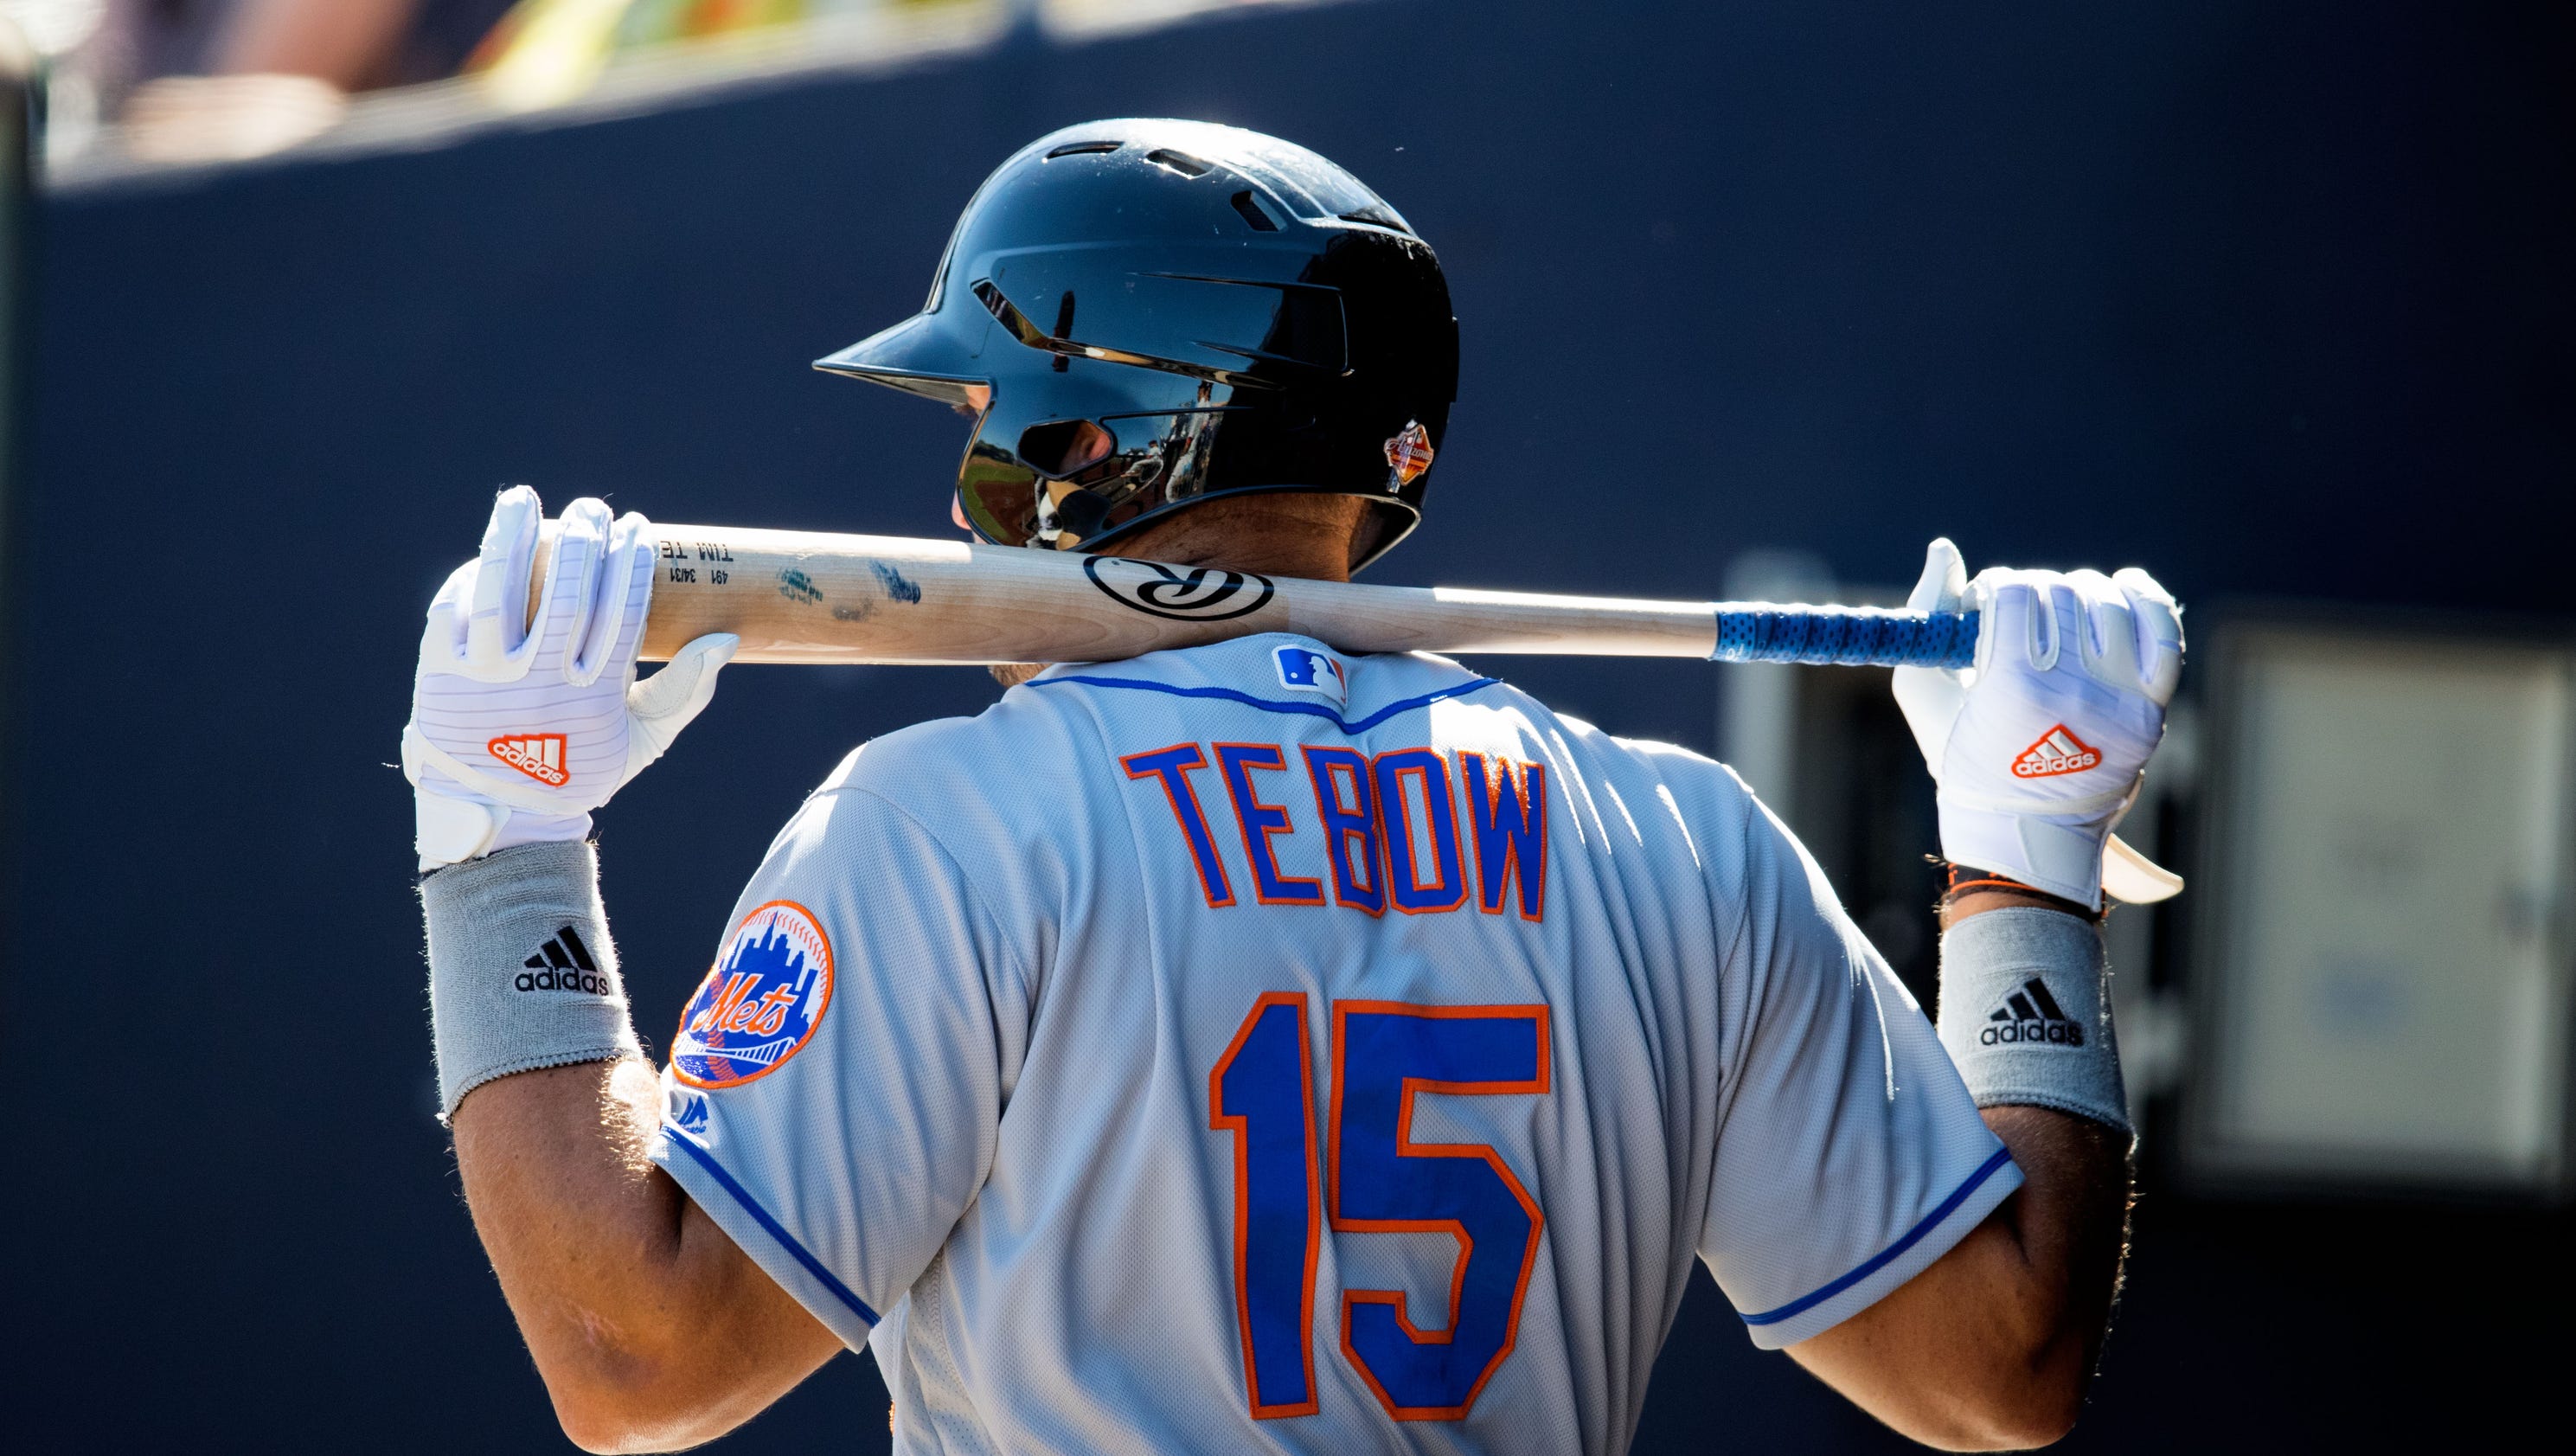 Tim Tebow launches baseball career with Mets